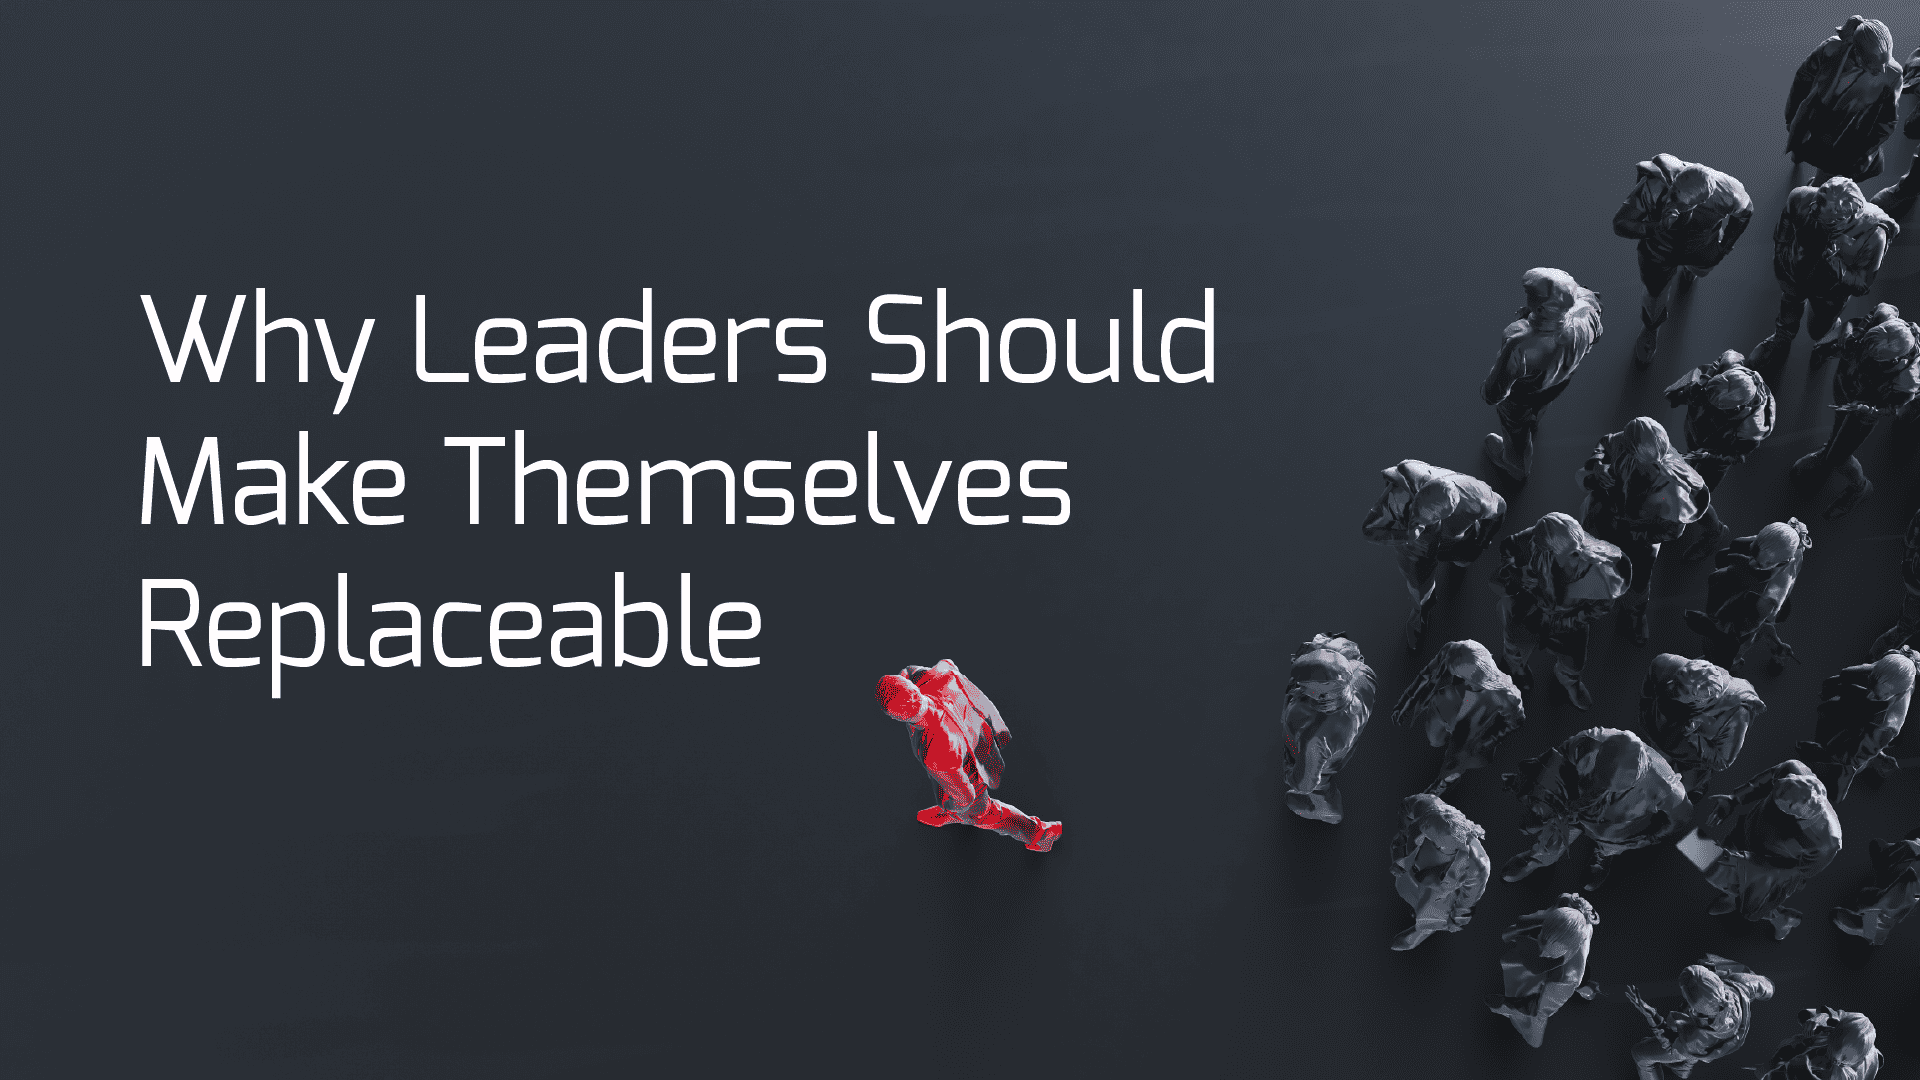 Why Leaders Should Make Themselves Replaceable